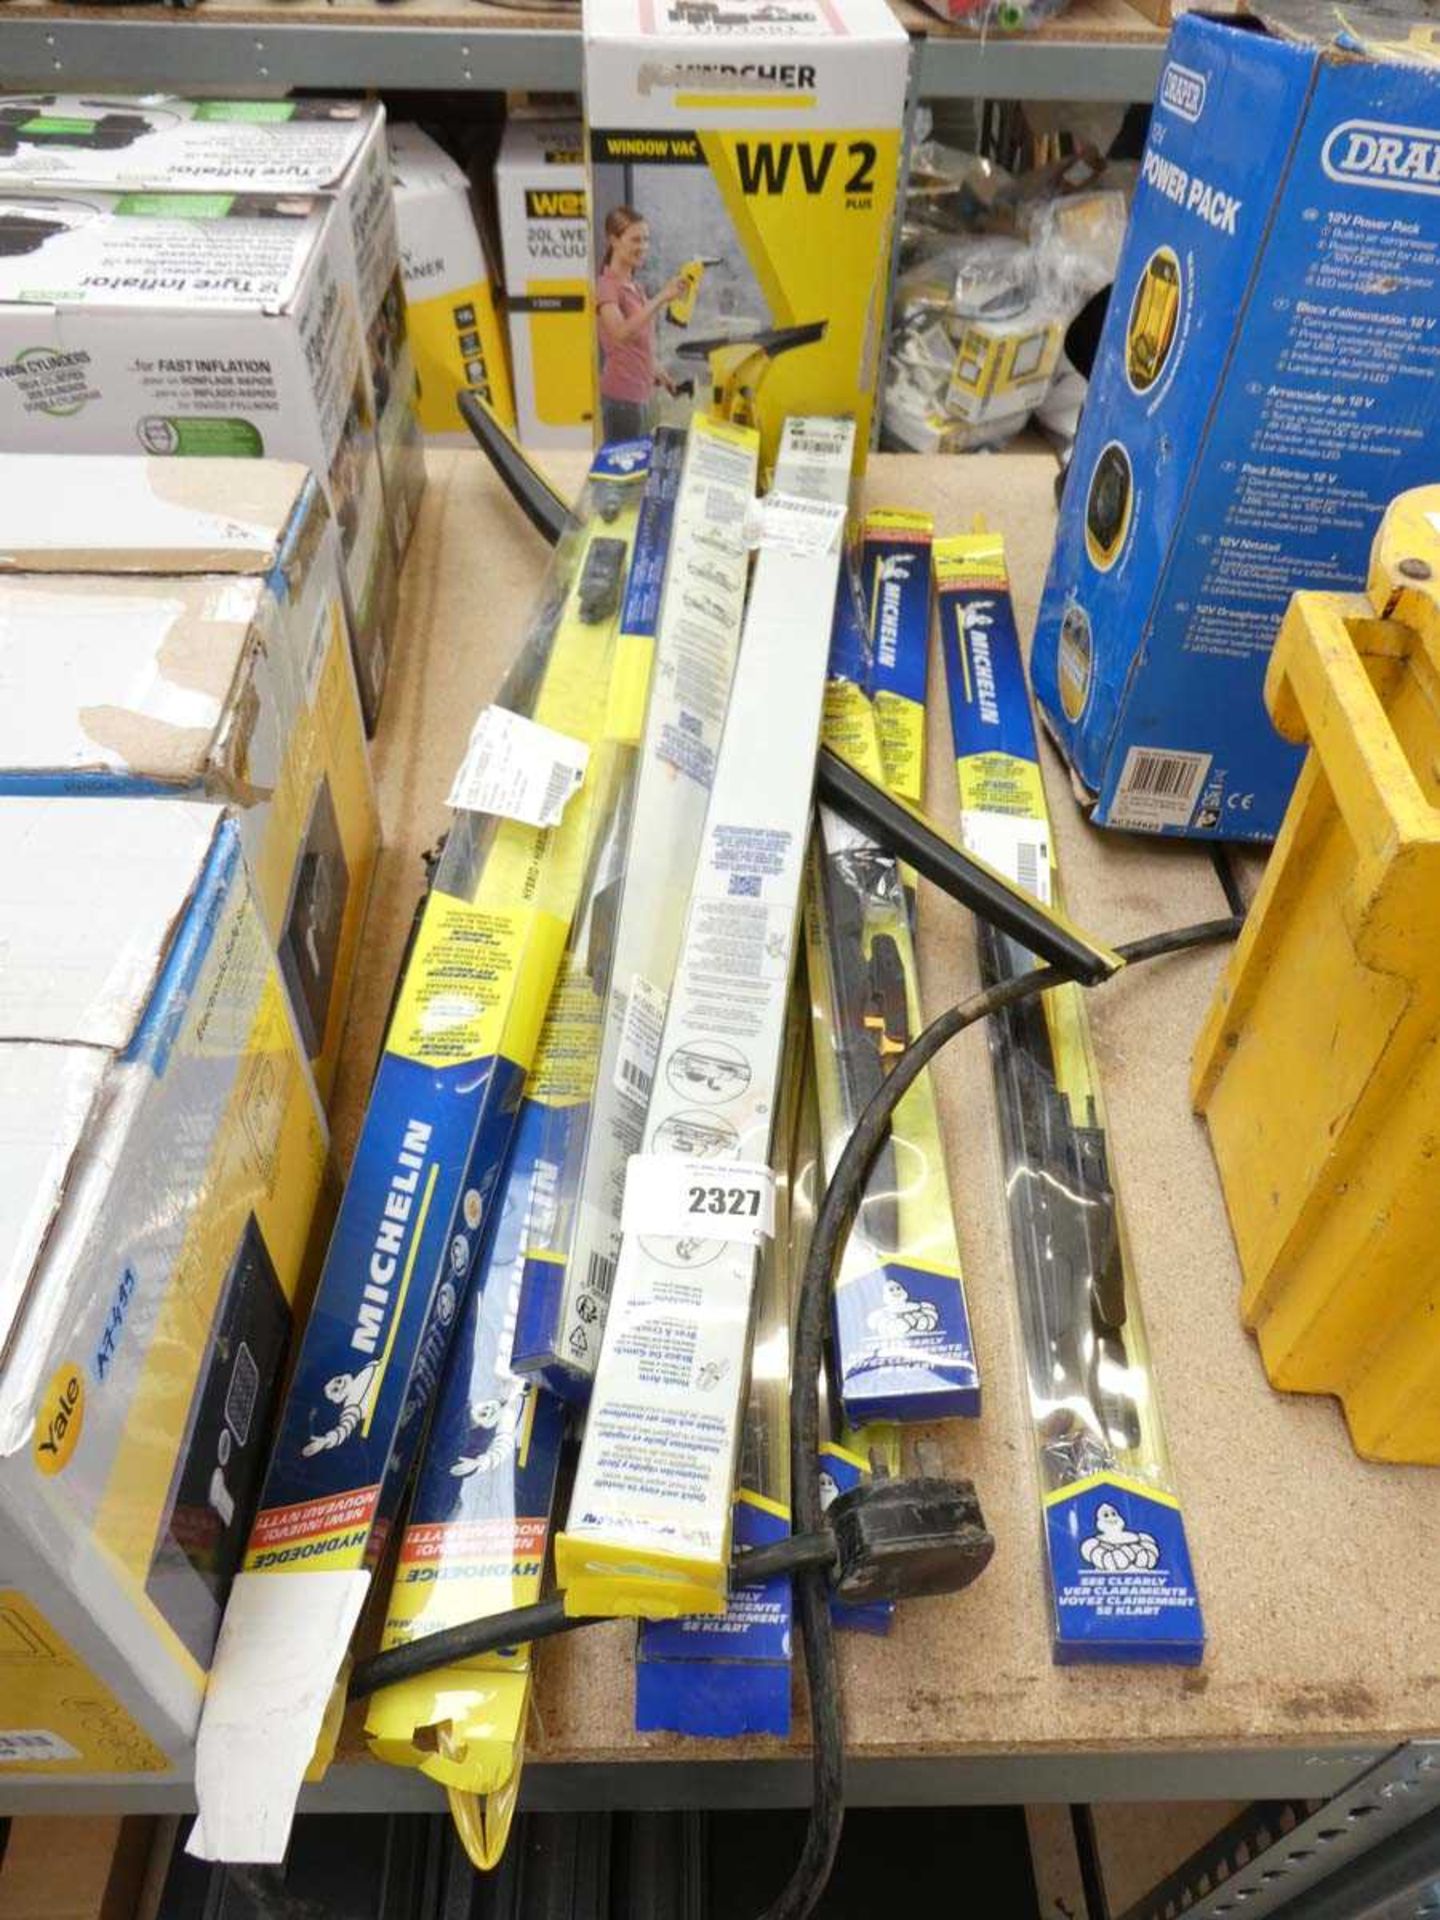 +VAT Selection of Michelin car wiper blades and Karcher window vac